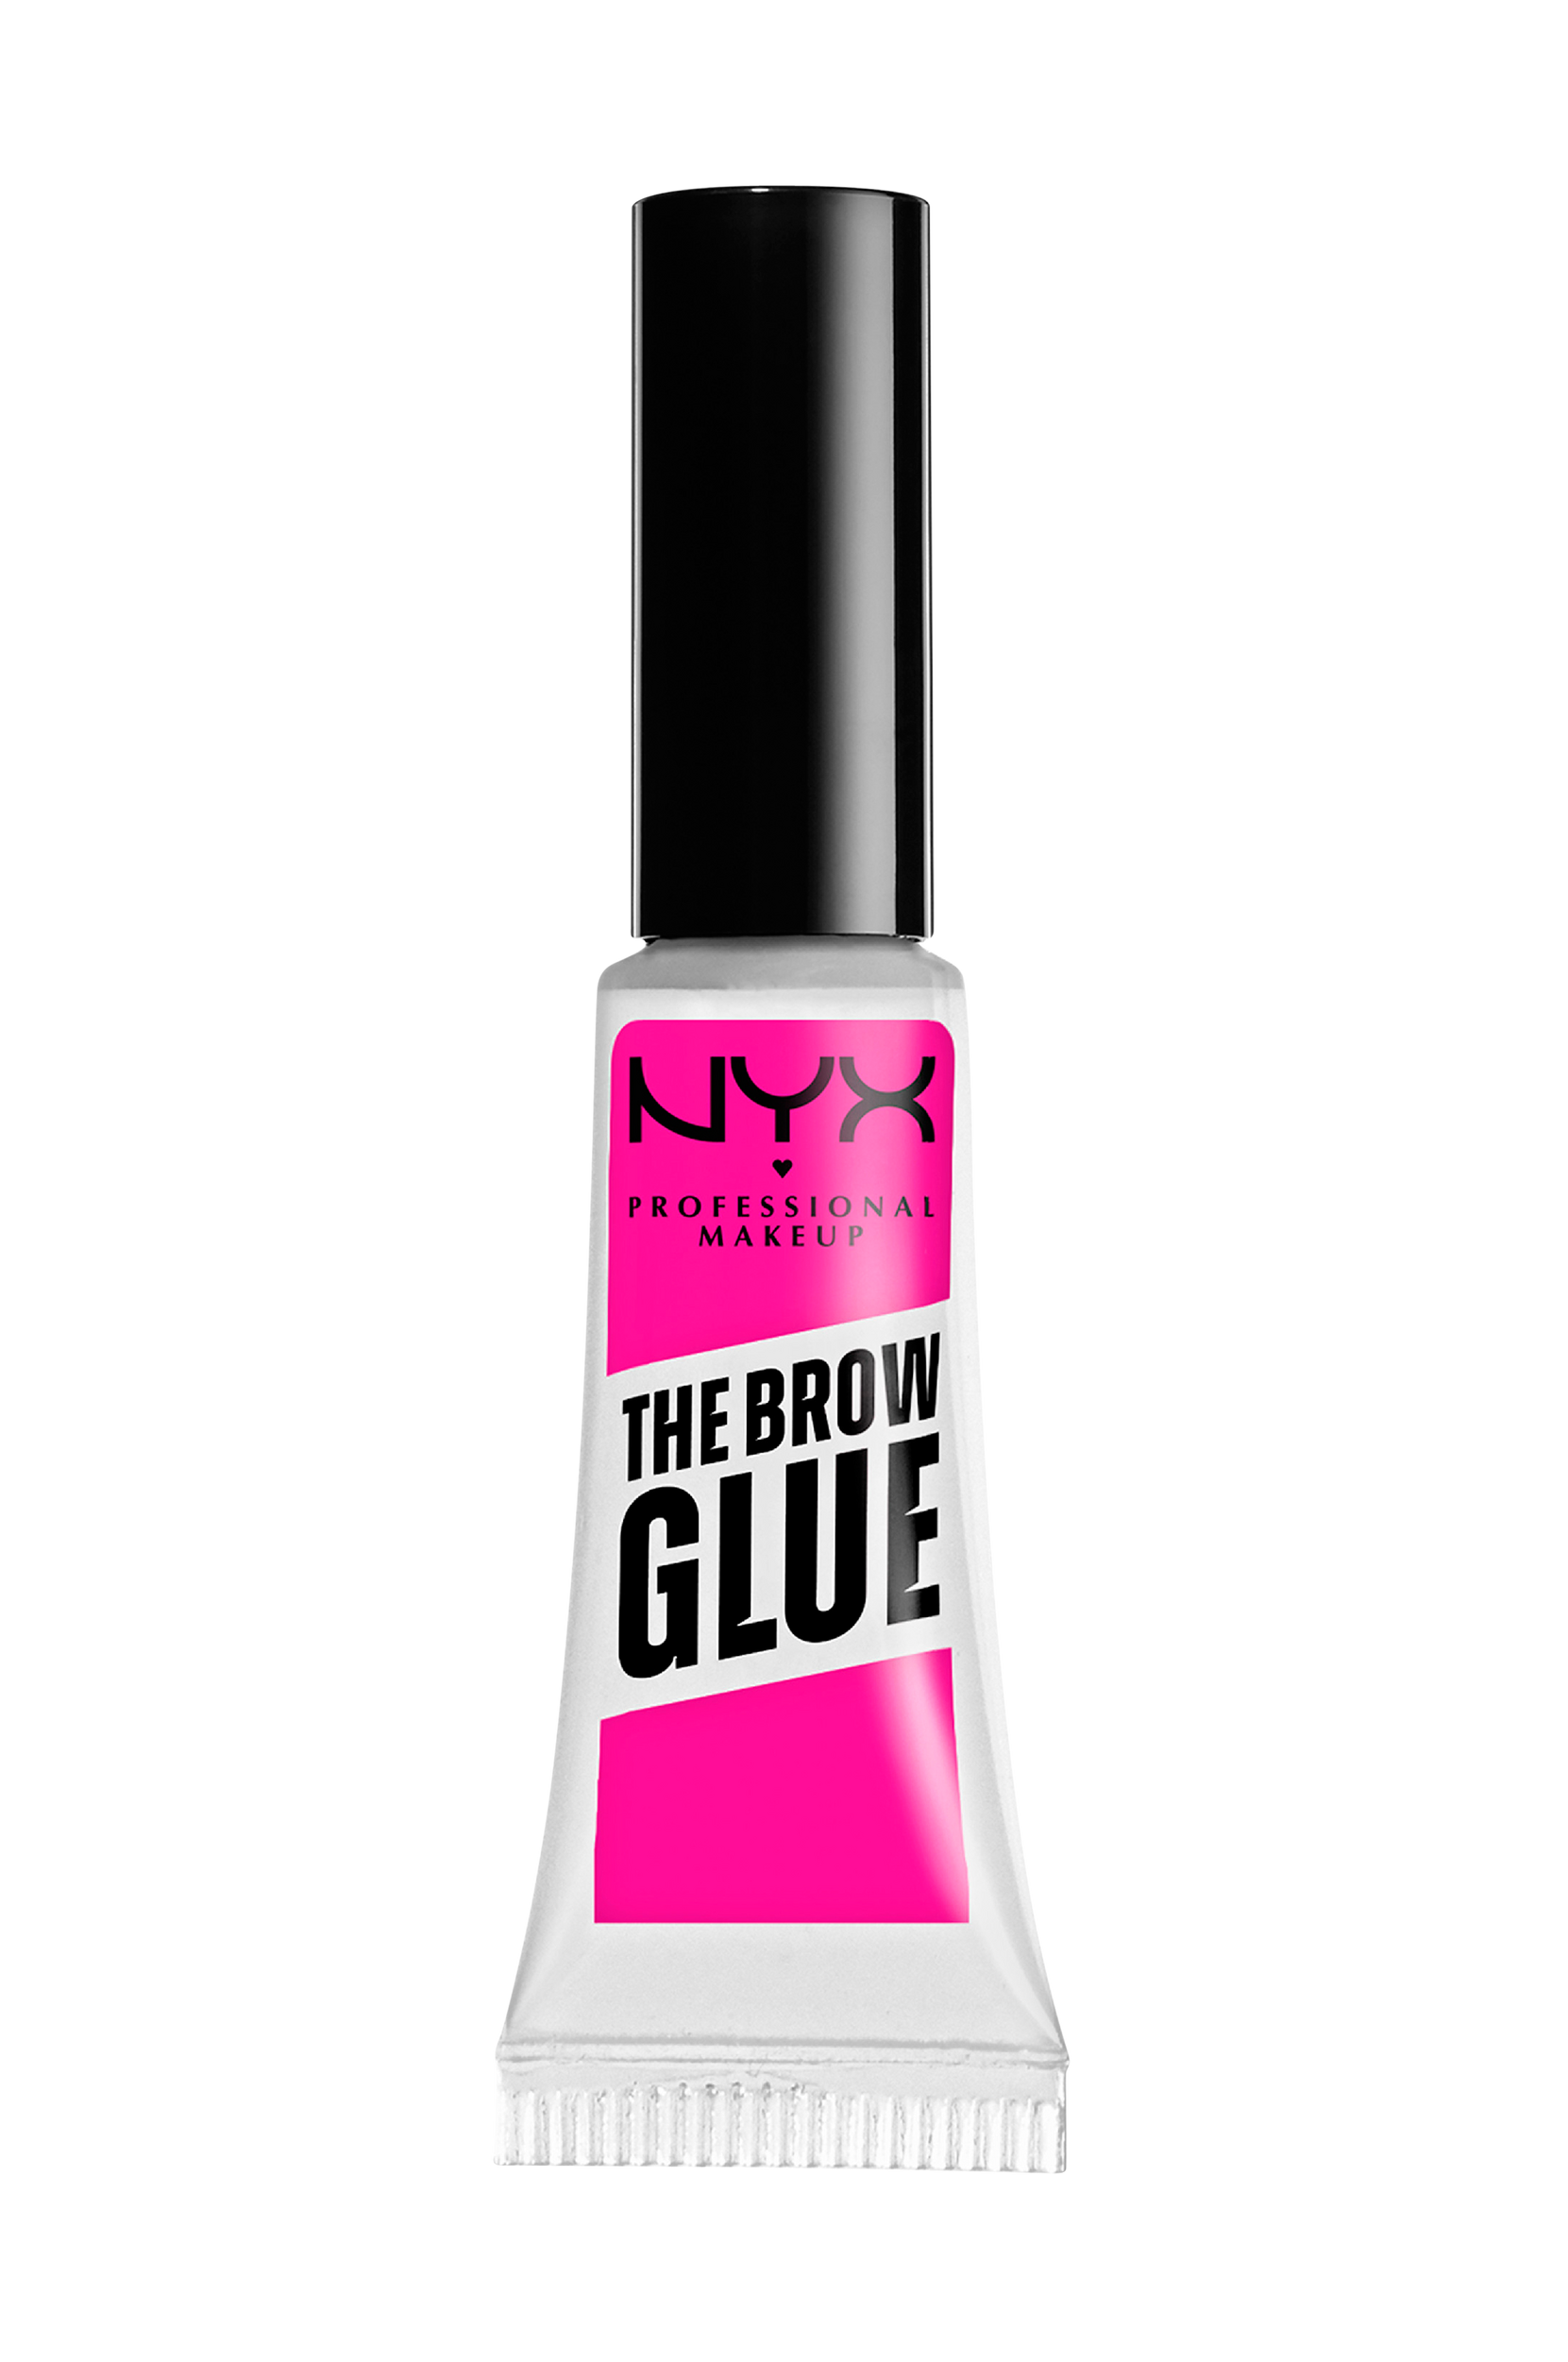 NYX Professional Makeup - The Brow Glue Instant Brow Styler - 5 g - Transparent